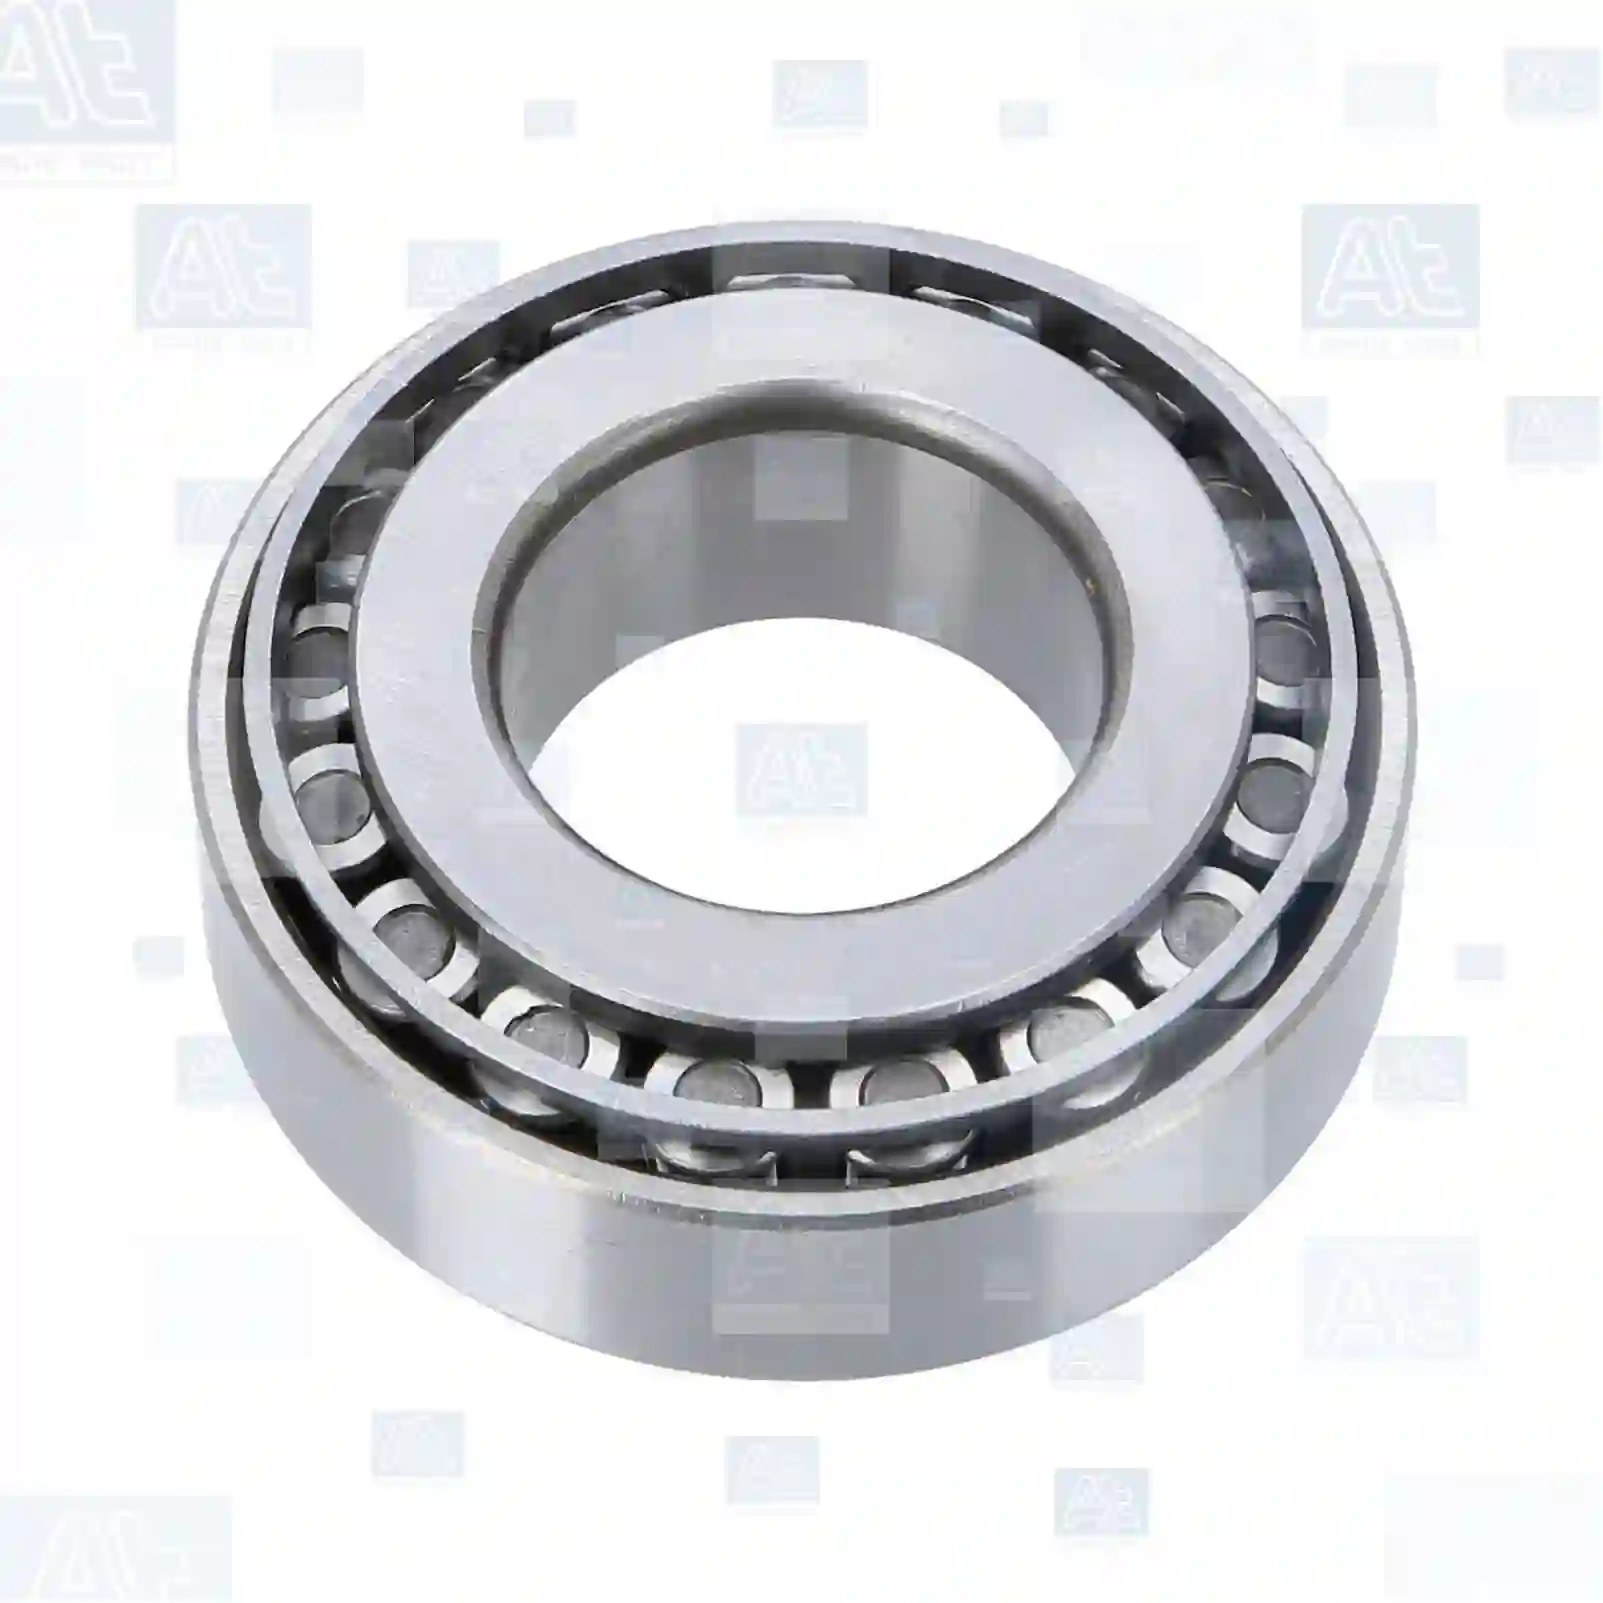 Tapered roller bearing, at no 77724607, oem no: 0264053500, MA111370, MB025345, MB035007, MB393956, 15919, 005092244, 1440637X1, TK004209923, TK4209923, 12337579, 94032099, 94248083, 988435105, 988435105A, 988435109, 988435109A, SZ36635005, 91007-P5D-007, 91007-PY4-003, 53232-11000, 8-12337579-0, 8-94248083-0, 8-94248083-1, 9-00093172-0, 26800130, 00221-27210, 06324990068, 06324990079, 81934200064, 87523300200, A0773220700, 022127141, 0221271410, 022127210, 055933075, 075527141, 000720032207, 0089817405, 0089817605, 2506263031, 250626303101, 3199810005, MA111370, MB0025345, MB025345, MB035007, MB393956, 32219-9X501, 40210-F3900, 0023432207, 0959232207, 0959532207, 5000388284, 5000388401, 5010241918, 5516010573, 7701465647, 7703090093, 202635, 183684, 19577, ZG02971-0008 At Spare Part | Engine, Accelerator Pedal, Camshaft, Connecting Rod, Crankcase, Crankshaft, Cylinder Head, Engine Suspension Mountings, Exhaust Manifold, Exhaust Gas Recirculation, Filter Kits, Flywheel Housing, General Overhaul Kits, Engine, Intake Manifold, Oil Cleaner, Oil Cooler, Oil Filter, Oil Pump, Oil Sump, Piston & Liner, Sensor & Switch, Timing Case, Turbocharger, Cooling System, Belt Tensioner, Coolant Filter, Coolant Pipe, Corrosion Prevention Agent, Drive, Expansion Tank, Fan, Intercooler, Monitors & Gauges, Radiator, Thermostat, V-Belt / Timing belt, Water Pump, Fuel System, Electronical Injector Unit, Feed Pump, Fuel Filter, cpl., Fuel Gauge Sender,  Fuel Line, Fuel Pump, Fuel Tank, Injection Line Kit, Injection Pump, Exhaust System, Clutch & Pedal, Gearbox, Propeller Shaft, Axles, Brake System, Hubs & Wheels, Suspension, Leaf Spring, Universal Parts / Accessories, Steering, Electrical System, Cabin Tapered roller bearing, at no 77724607, oem no: 0264053500, MA111370, MB025345, MB035007, MB393956, 15919, 005092244, 1440637X1, TK004209923, TK4209923, 12337579, 94032099, 94248083, 988435105, 988435105A, 988435109, 988435109A, SZ36635005, 91007-P5D-007, 91007-PY4-003, 53232-11000, 8-12337579-0, 8-94248083-0, 8-94248083-1, 9-00093172-0, 26800130, 00221-27210, 06324990068, 06324990079, 81934200064, 87523300200, A0773220700, 022127141, 0221271410, 022127210, 055933075, 075527141, 000720032207, 0089817405, 0089817605, 2506263031, 250626303101, 3199810005, MA111370, MB0025345, MB025345, MB035007, MB393956, 32219-9X501, 40210-F3900, 0023432207, 0959232207, 0959532207, 5000388284, 5000388401, 5010241918, 5516010573, 7701465647, 7703090093, 202635, 183684, 19577, ZG02971-0008 At Spare Part | Engine, Accelerator Pedal, Camshaft, Connecting Rod, Crankcase, Crankshaft, Cylinder Head, Engine Suspension Mountings, Exhaust Manifold, Exhaust Gas Recirculation, Filter Kits, Flywheel Housing, General Overhaul Kits, Engine, Intake Manifold, Oil Cleaner, Oil Cooler, Oil Filter, Oil Pump, Oil Sump, Piston & Liner, Sensor & Switch, Timing Case, Turbocharger, Cooling System, Belt Tensioner, Coolant Filter, Coolant Pipe, Corrosion Prevention Agent, Drive, Expansion Tank, Fan, Intercooler, Monitors & Gauges, Radiator, Thermostat, V-Belt / Timing belt, Water Pump, Fuel System, Electronical Injector Unit, Feed Pump, Fuel Filter, cpl., Fuel Gauge Sender,  Fuel Line, Fuel Pump, Fuel Tank, Injection Line Kit, Injection Pump, Exhaust System, Clutch & Pedal, Gearbox, Propeller Shaft, Axles, Brake System, Hubs & Wheels, Suspension, Leaf Spring, Universal Parts / Accessories, Steering, Electrical System, Cabin